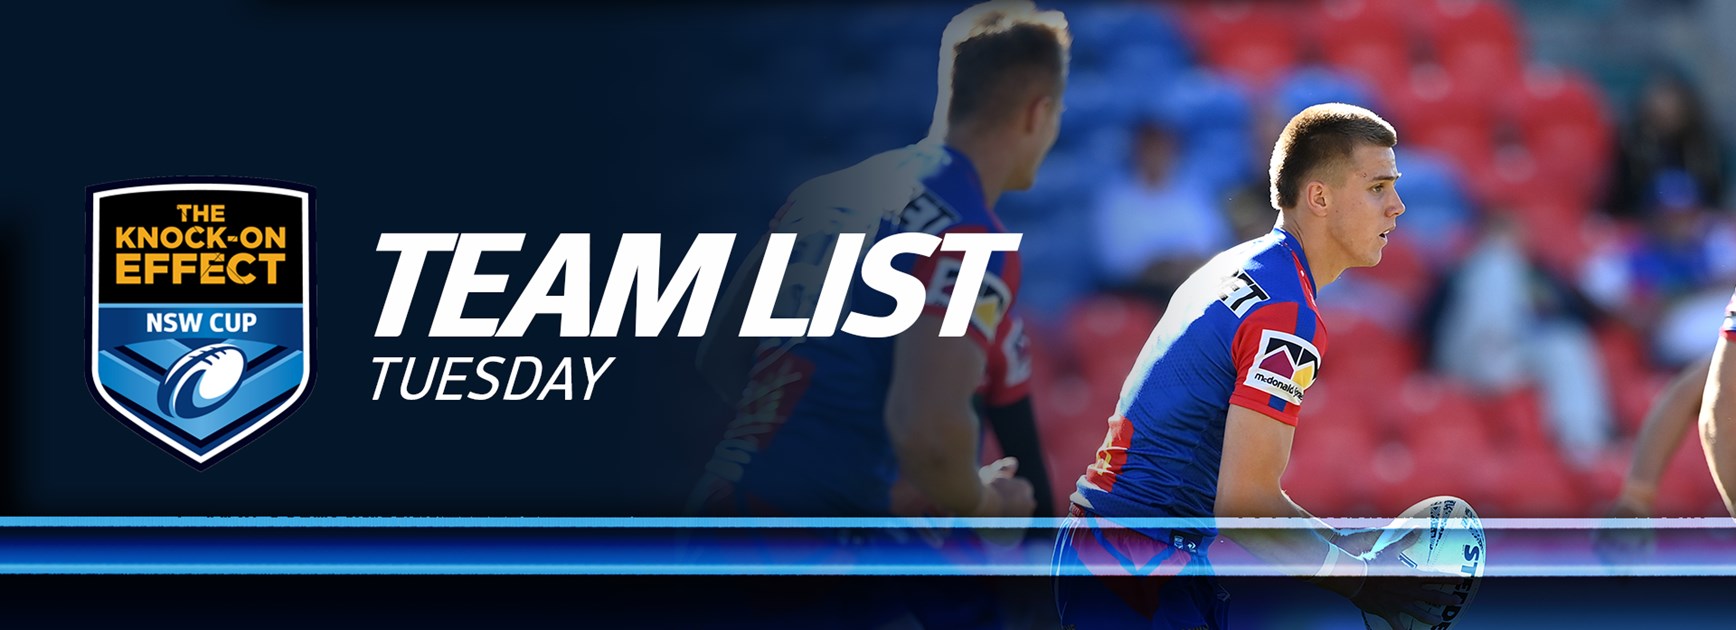 Team List Tuesday | The Knock-On Effect NSW Cup Round Nine